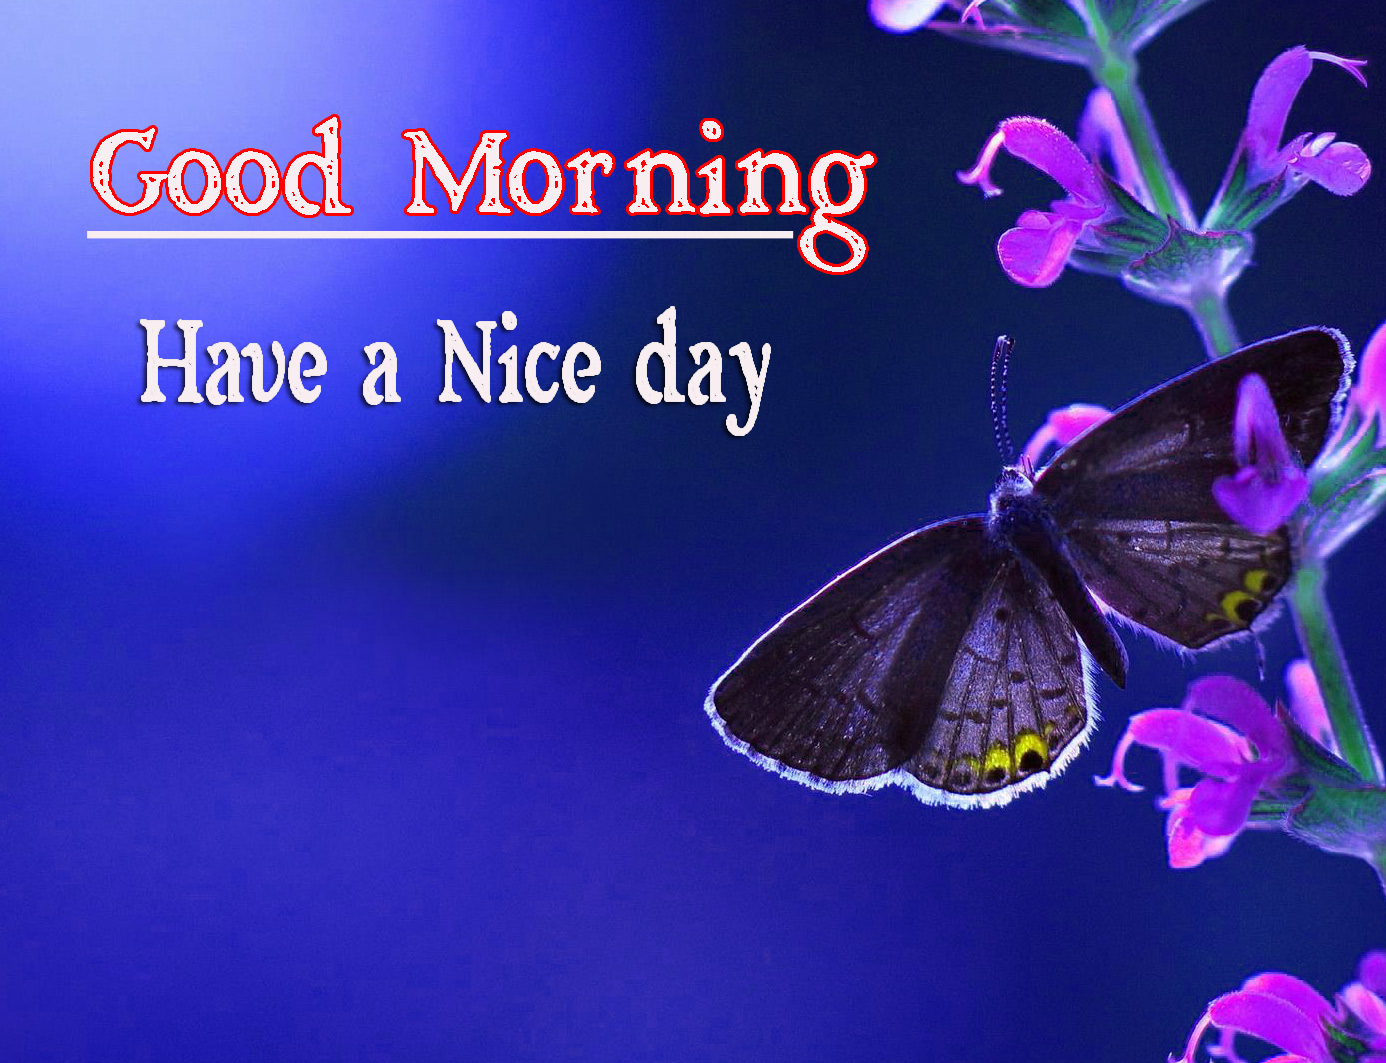 Very Good Morning Images Wallpaper for Facebook/Whatsapp